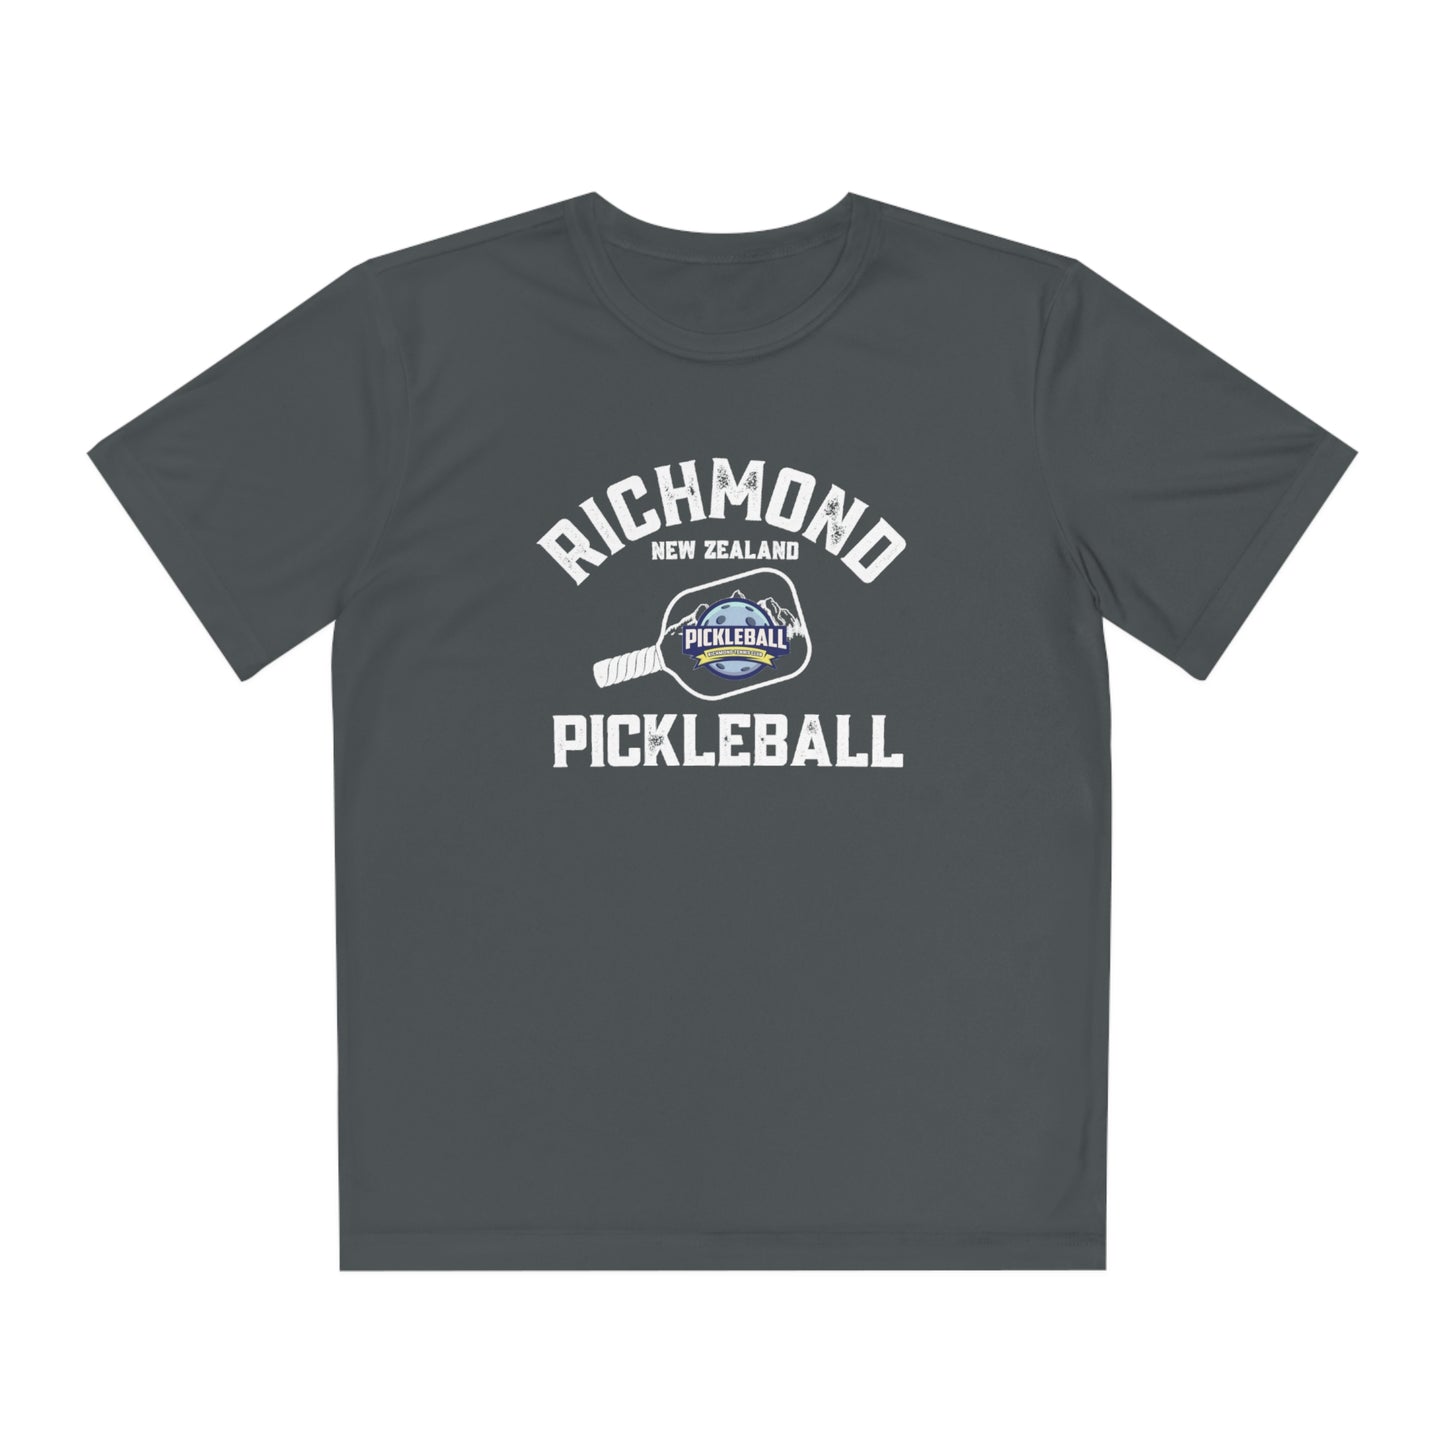 Richmond New Zealand Pickleball - Youth Competitor Tee Moisture Wicking - SPF 40